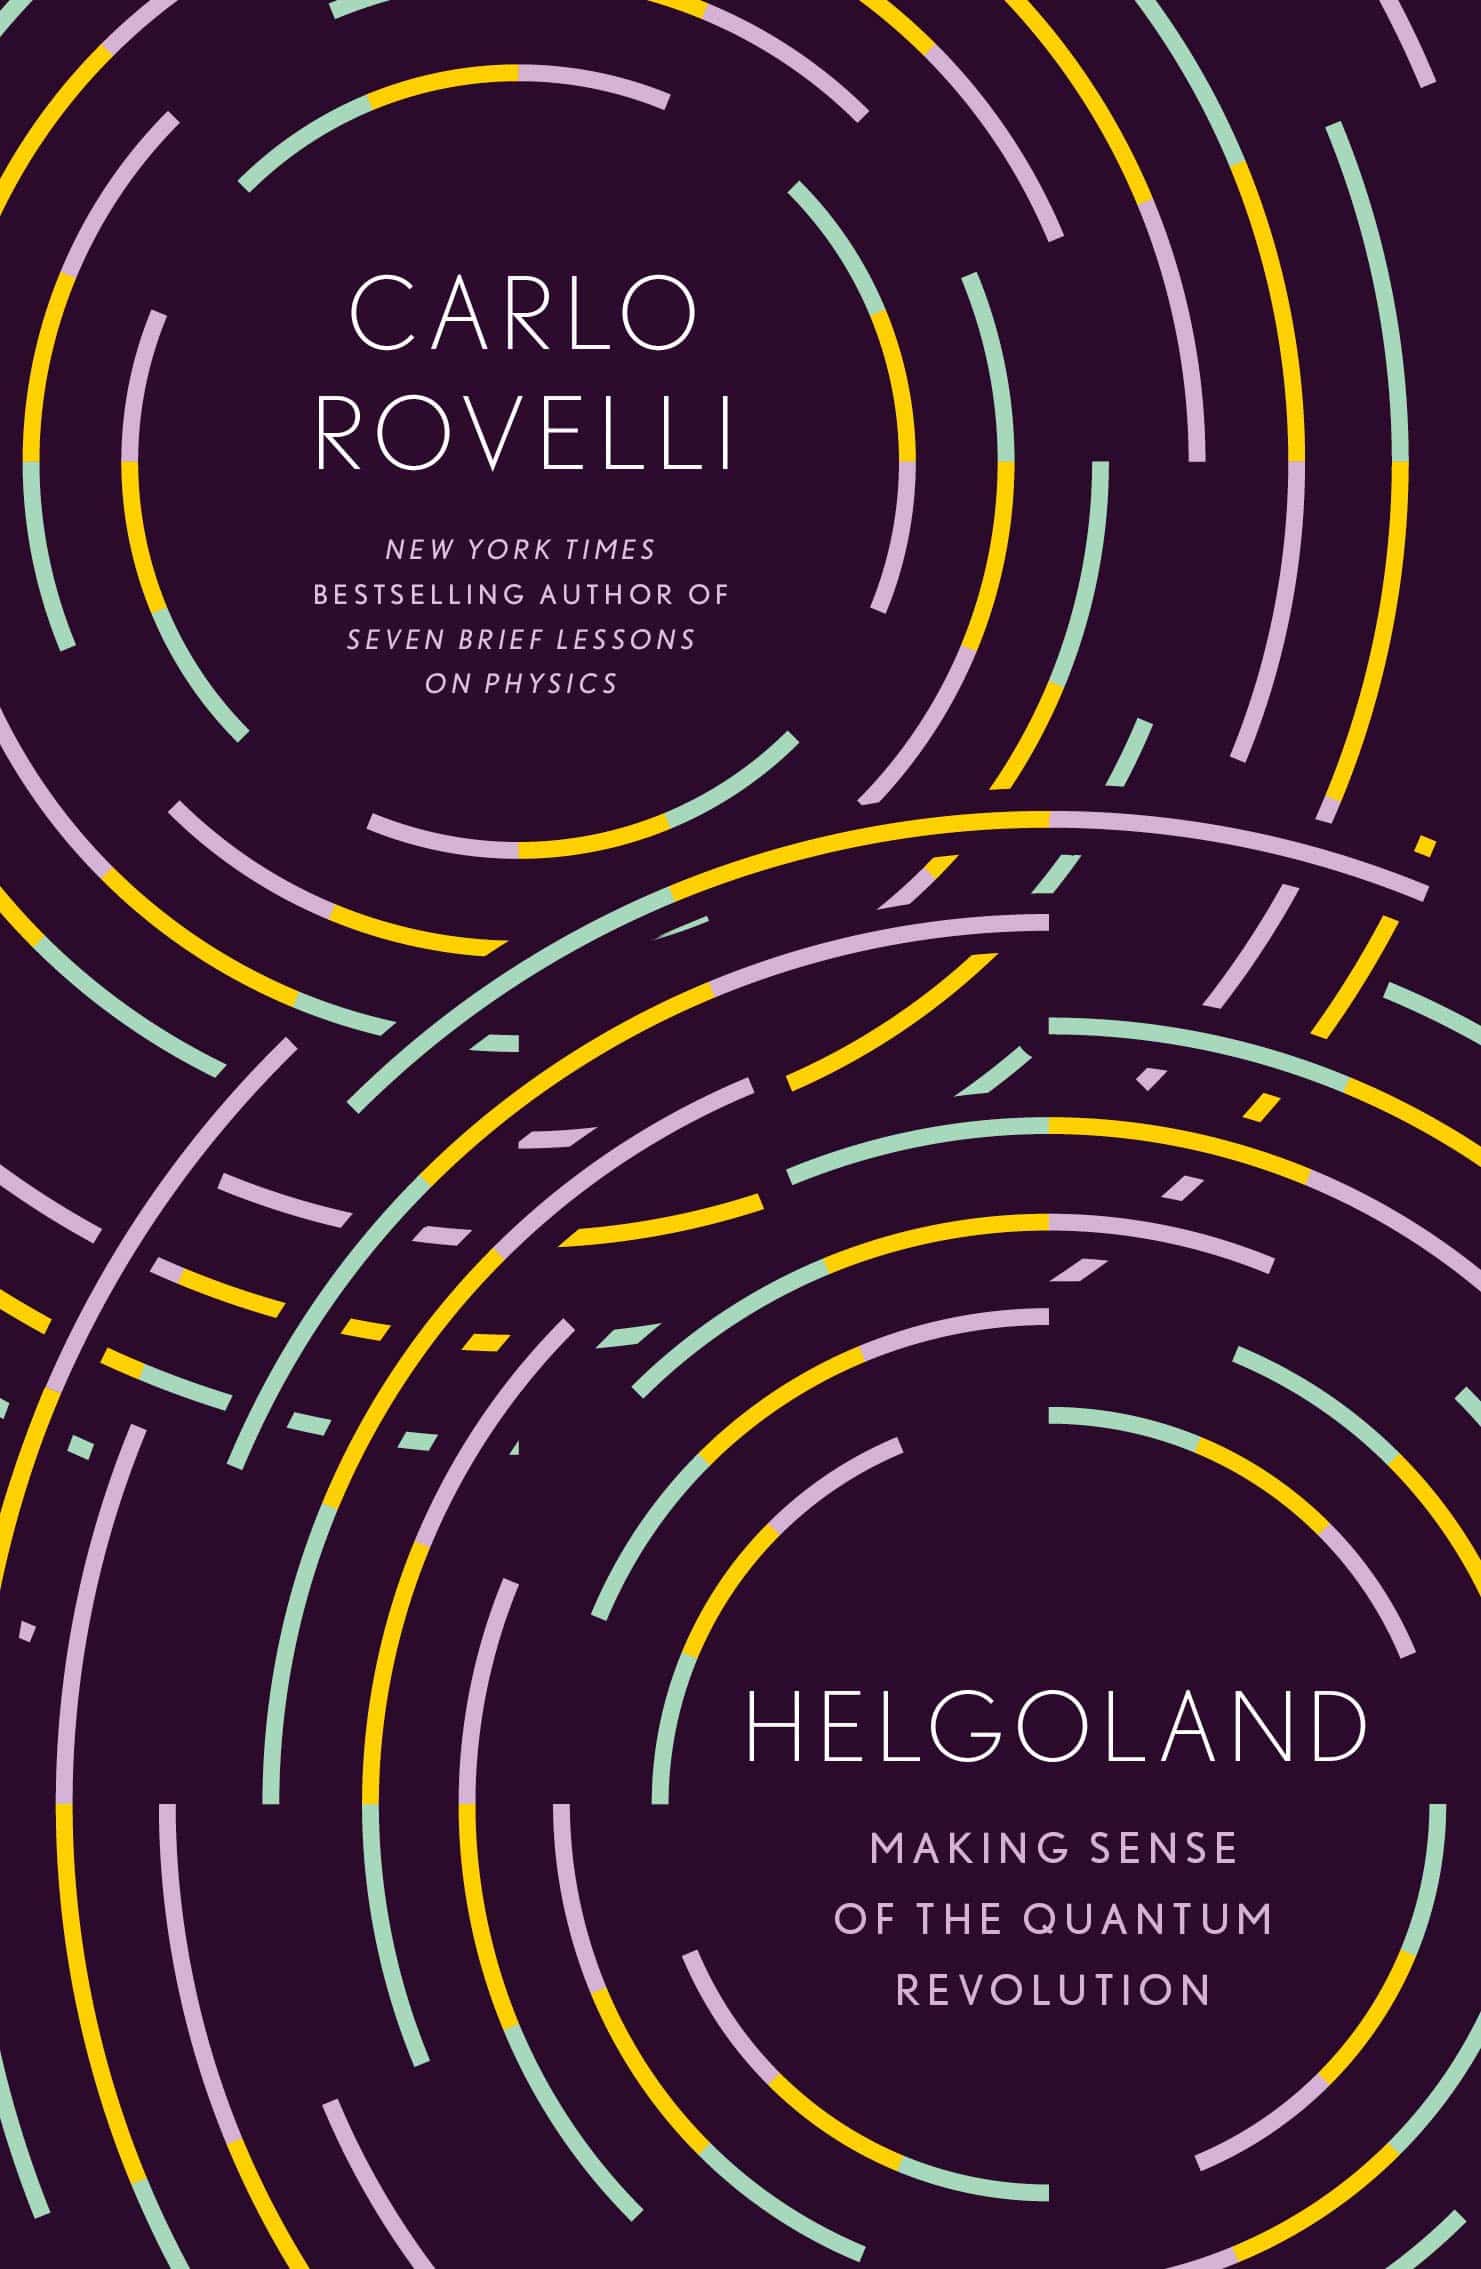 The cover of Helgoland